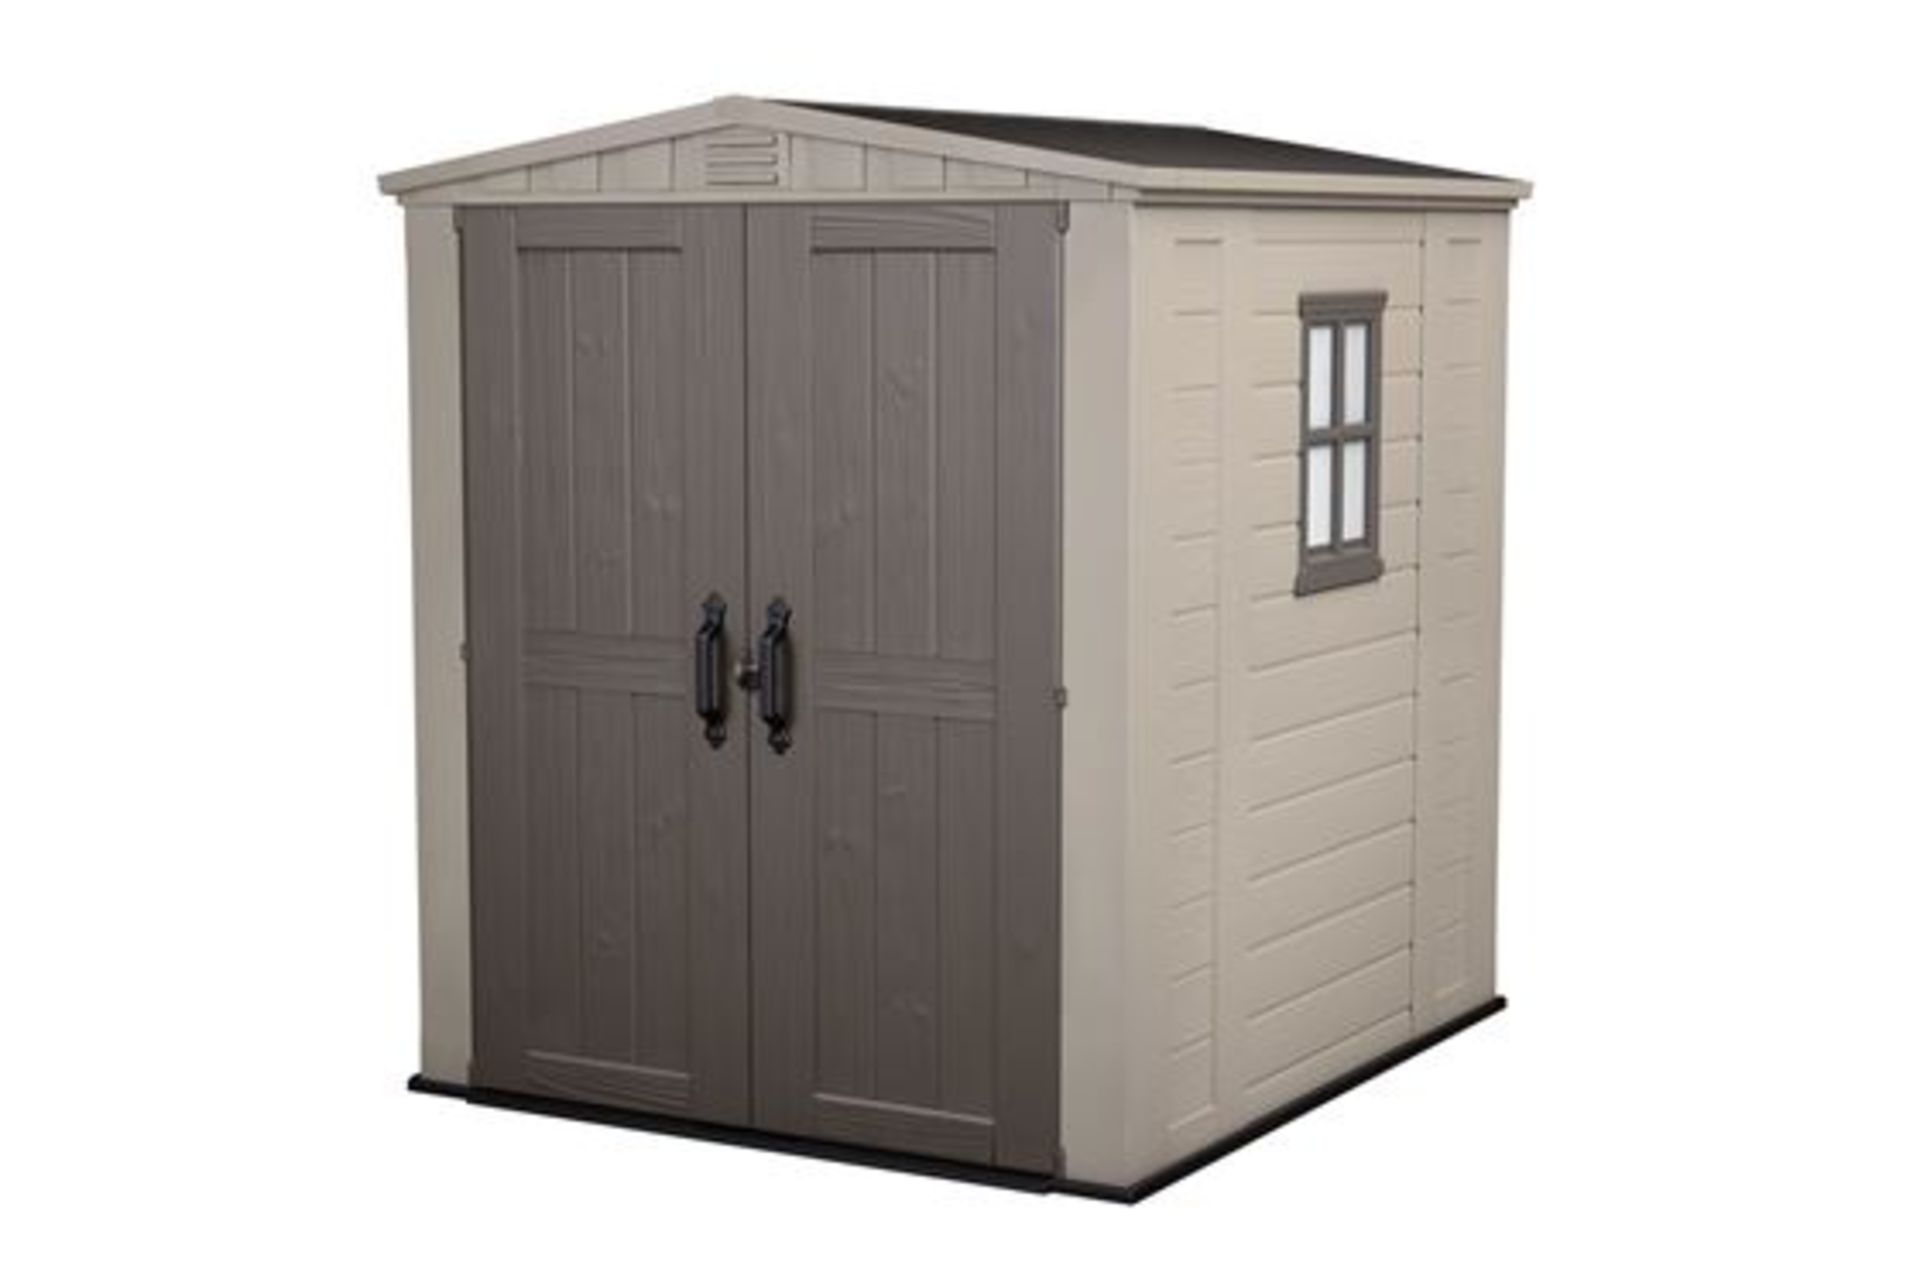 As new but unboxed on pallet Keter Factor Outdoor Plastic Garden Storage Shed, 6 x 6 feet The